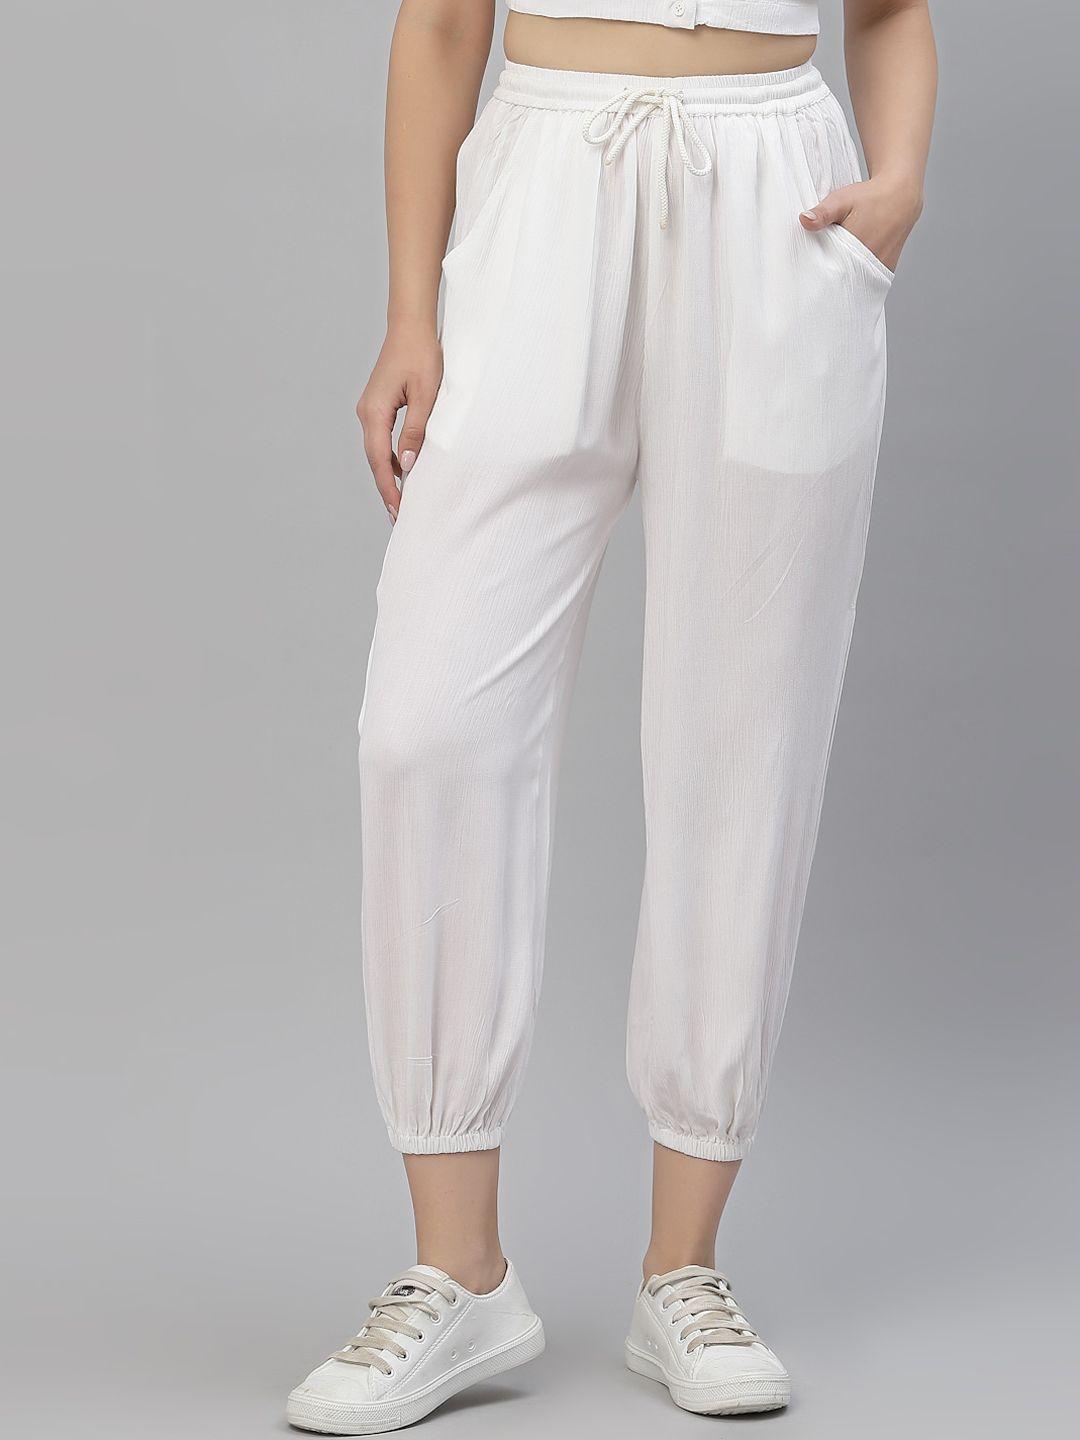 kassually women white joggers trousers